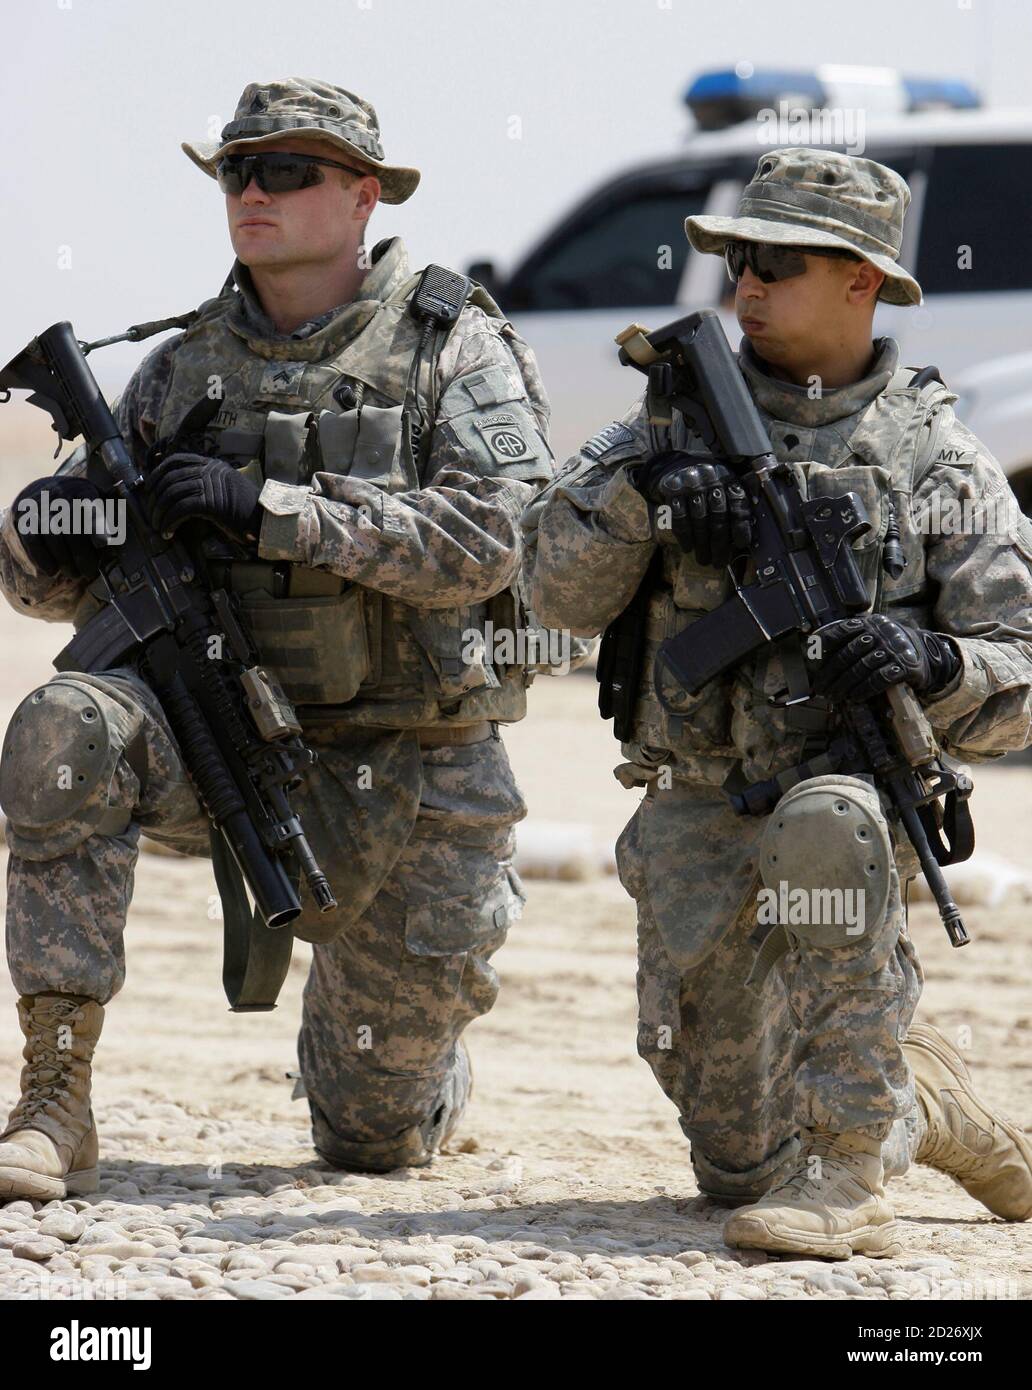 U.S. soldiers take up position during a military drill for Iraqi soldiers conducted by U.S. forces in Latifiya, about 40 km (25 miles) south of Baghdad, April 6, 2009. REUTERS/Atef Hassan (IRAQ MILITARY POLITICS) Foto de stock